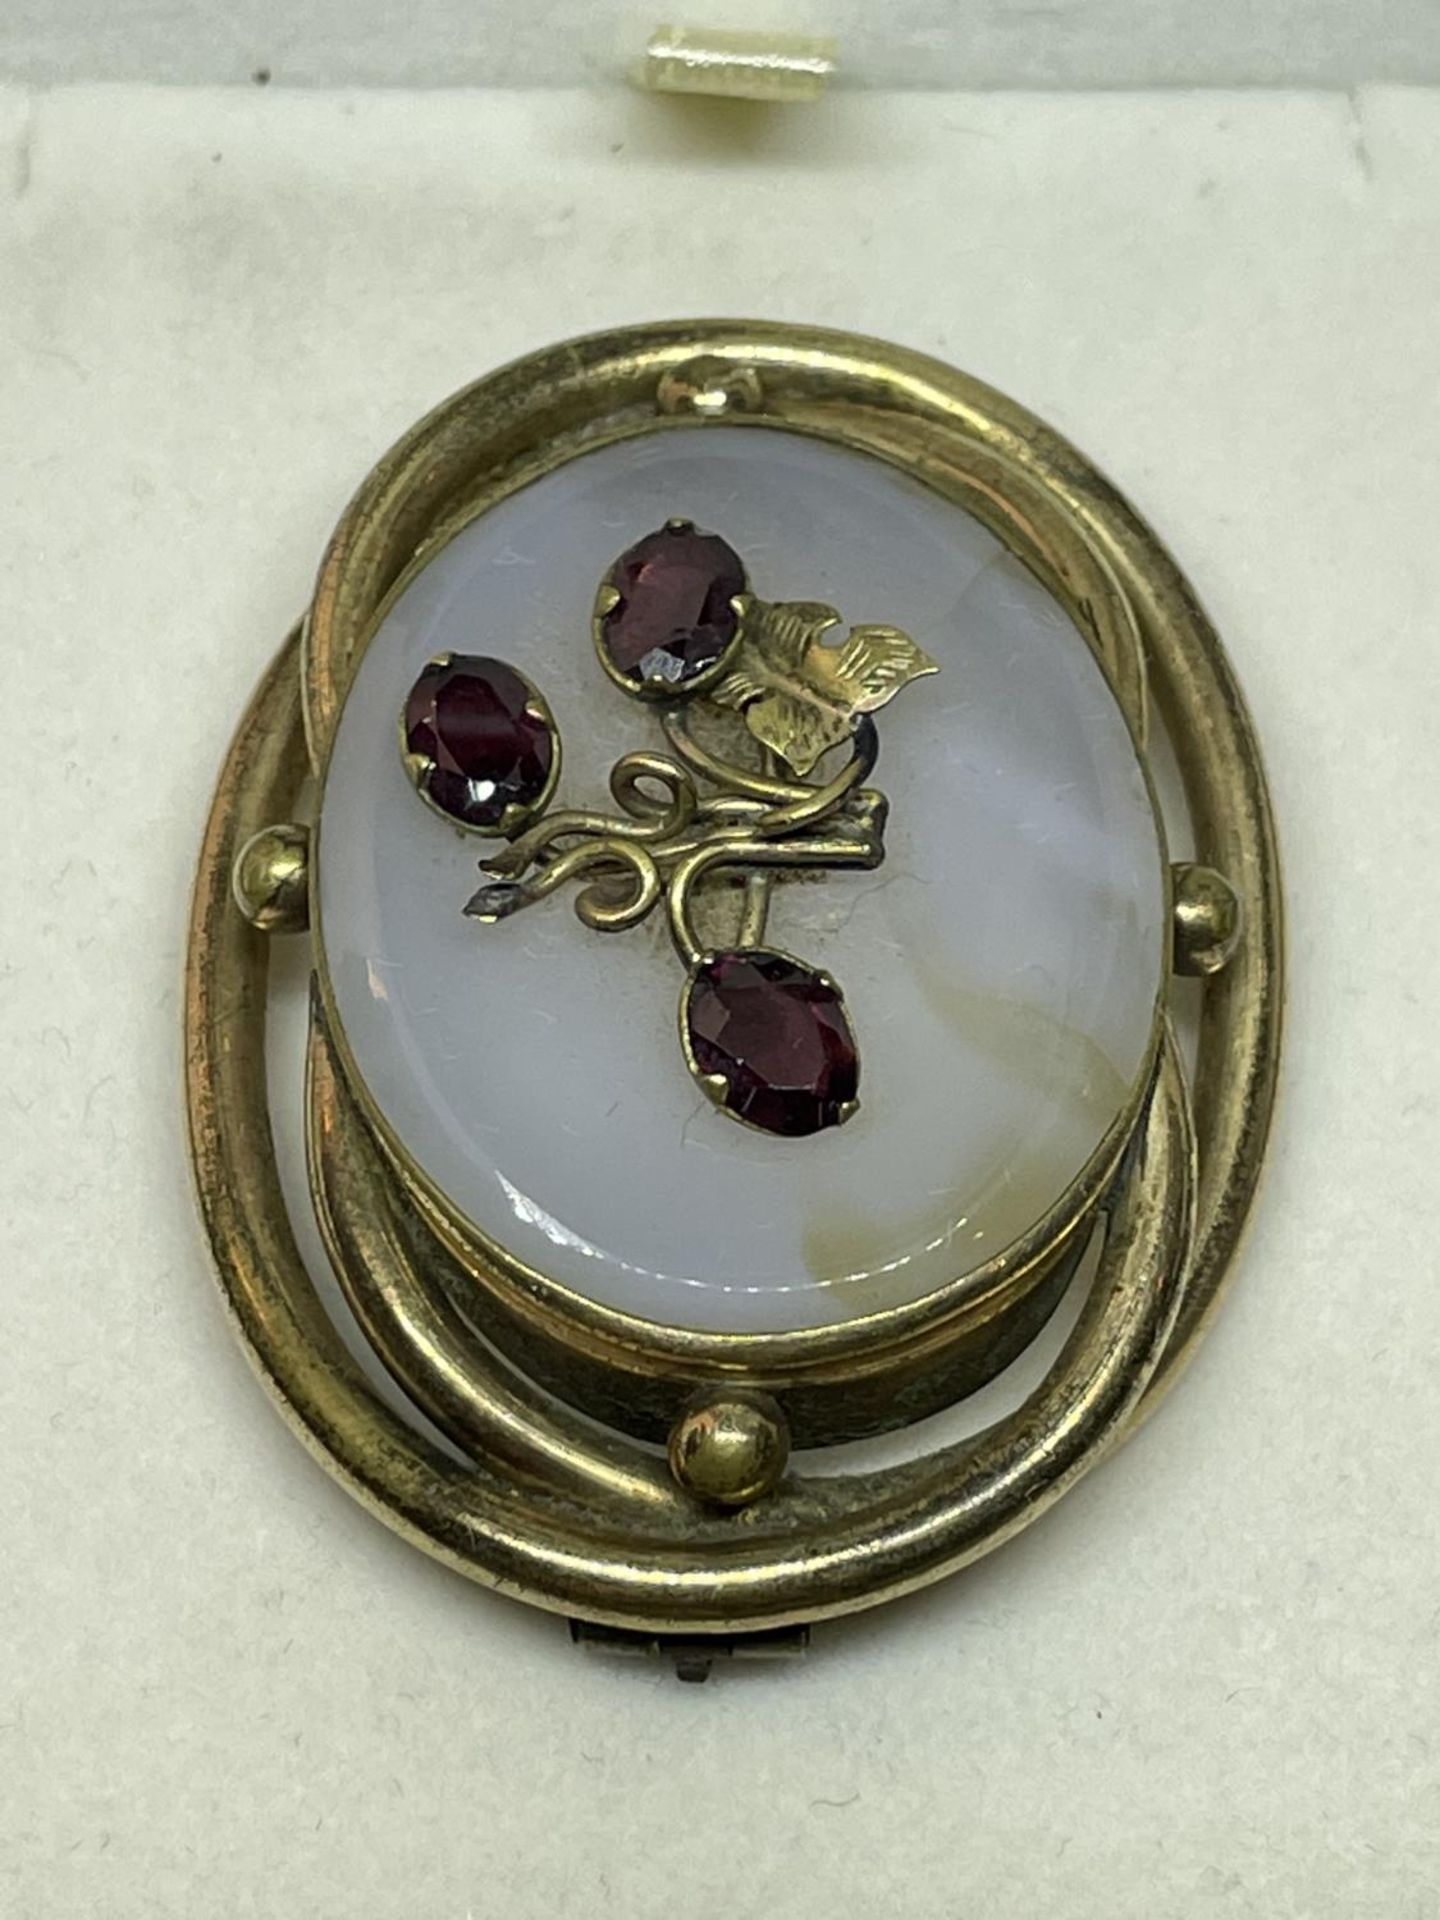 A PINCH BECK AGATE AND AMETHYST BROOCH IN A PRESENTATION BOX - Image 2 of 2